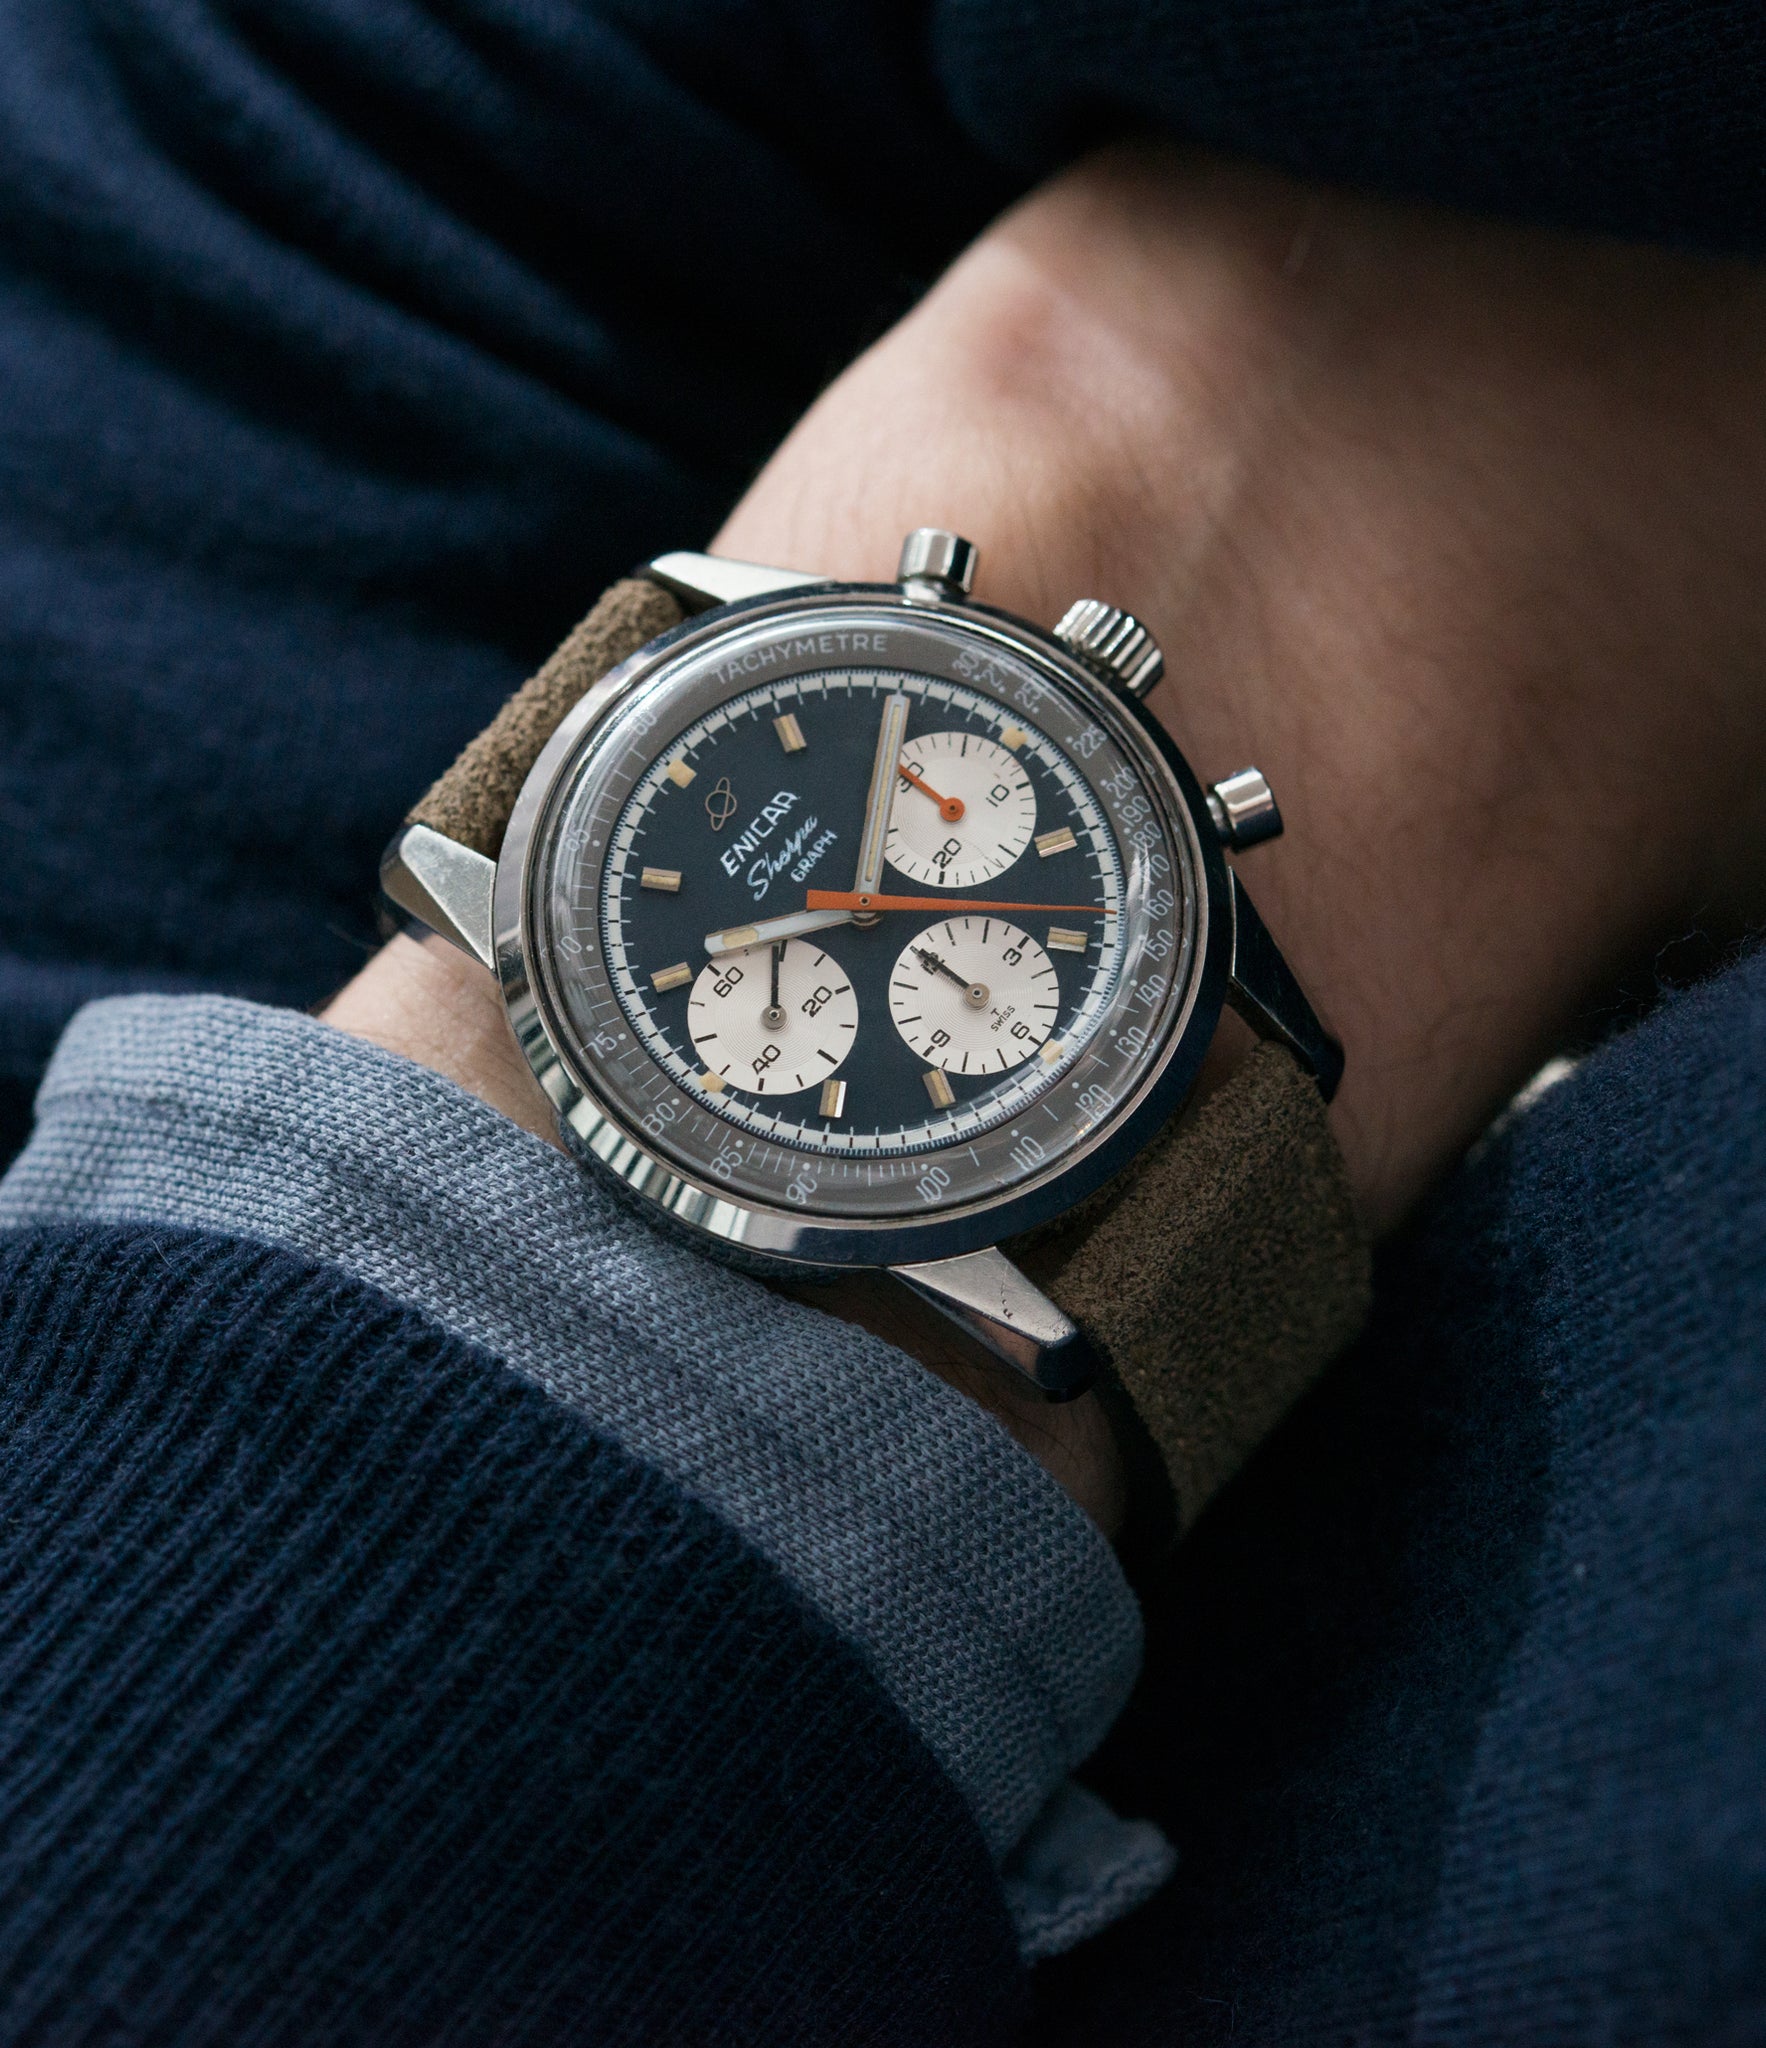 classic vintage sport watch Jim Clark Mark IV Enicar Sherpa Graph 300 Ref. 072-02-01 steel chronograph sport racing watch for sale online at A Collected Man London UK vintage watch specialist